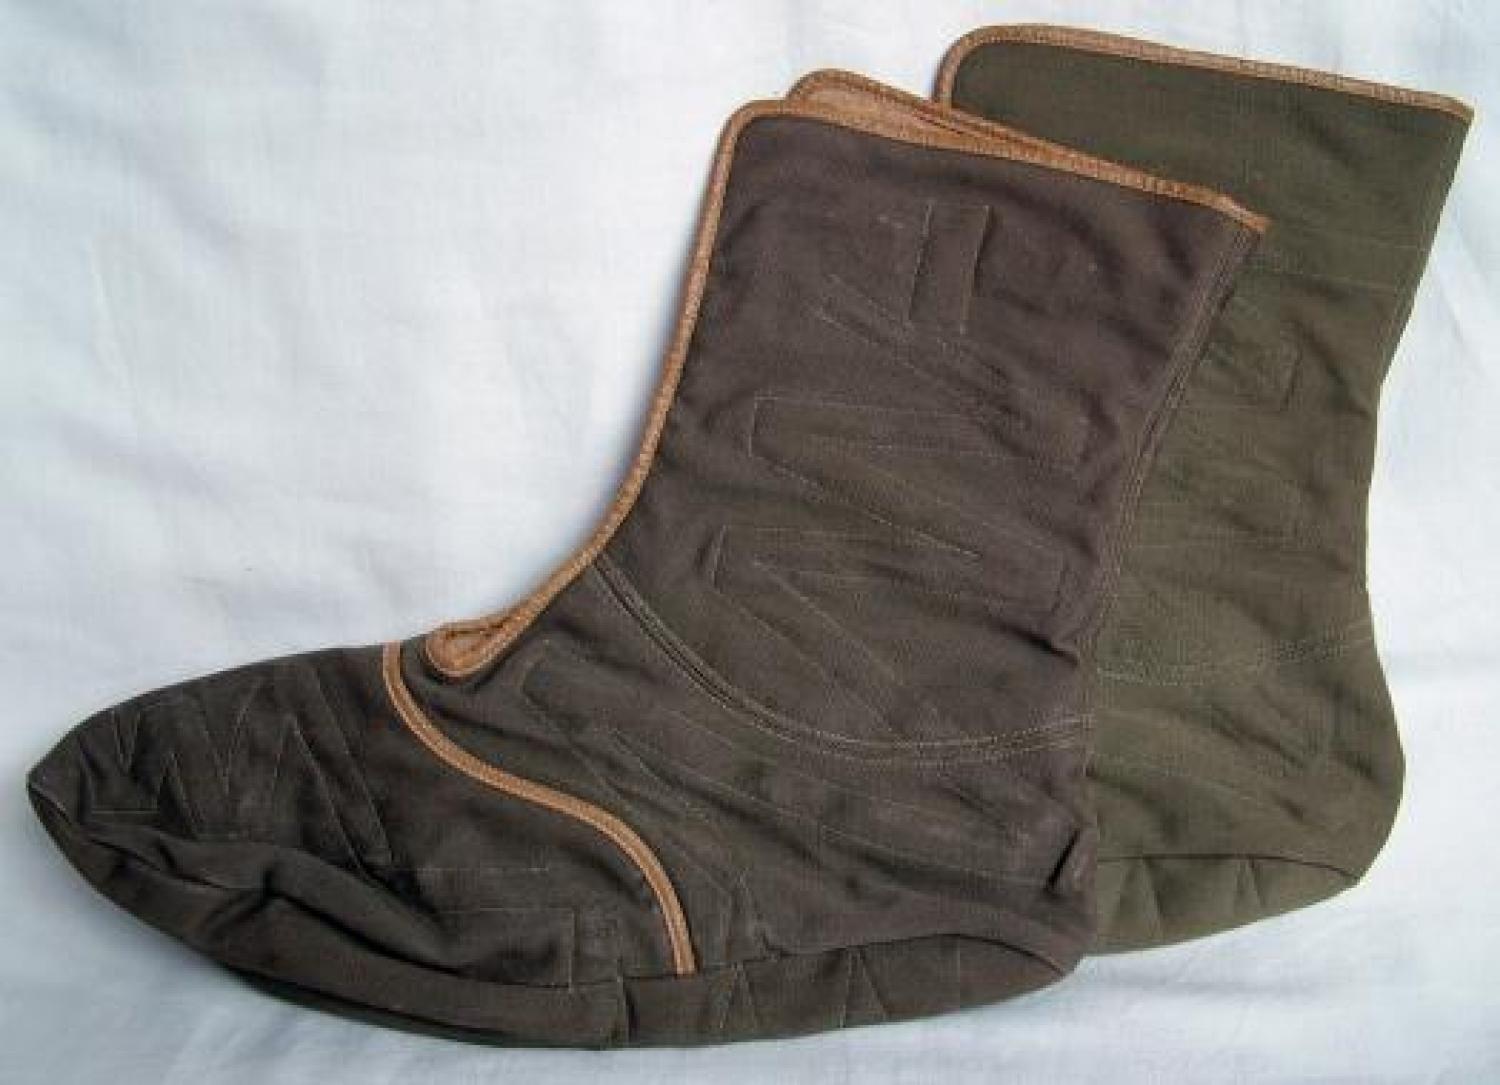 R.A.F. Electrically Heated Bootees, Type H